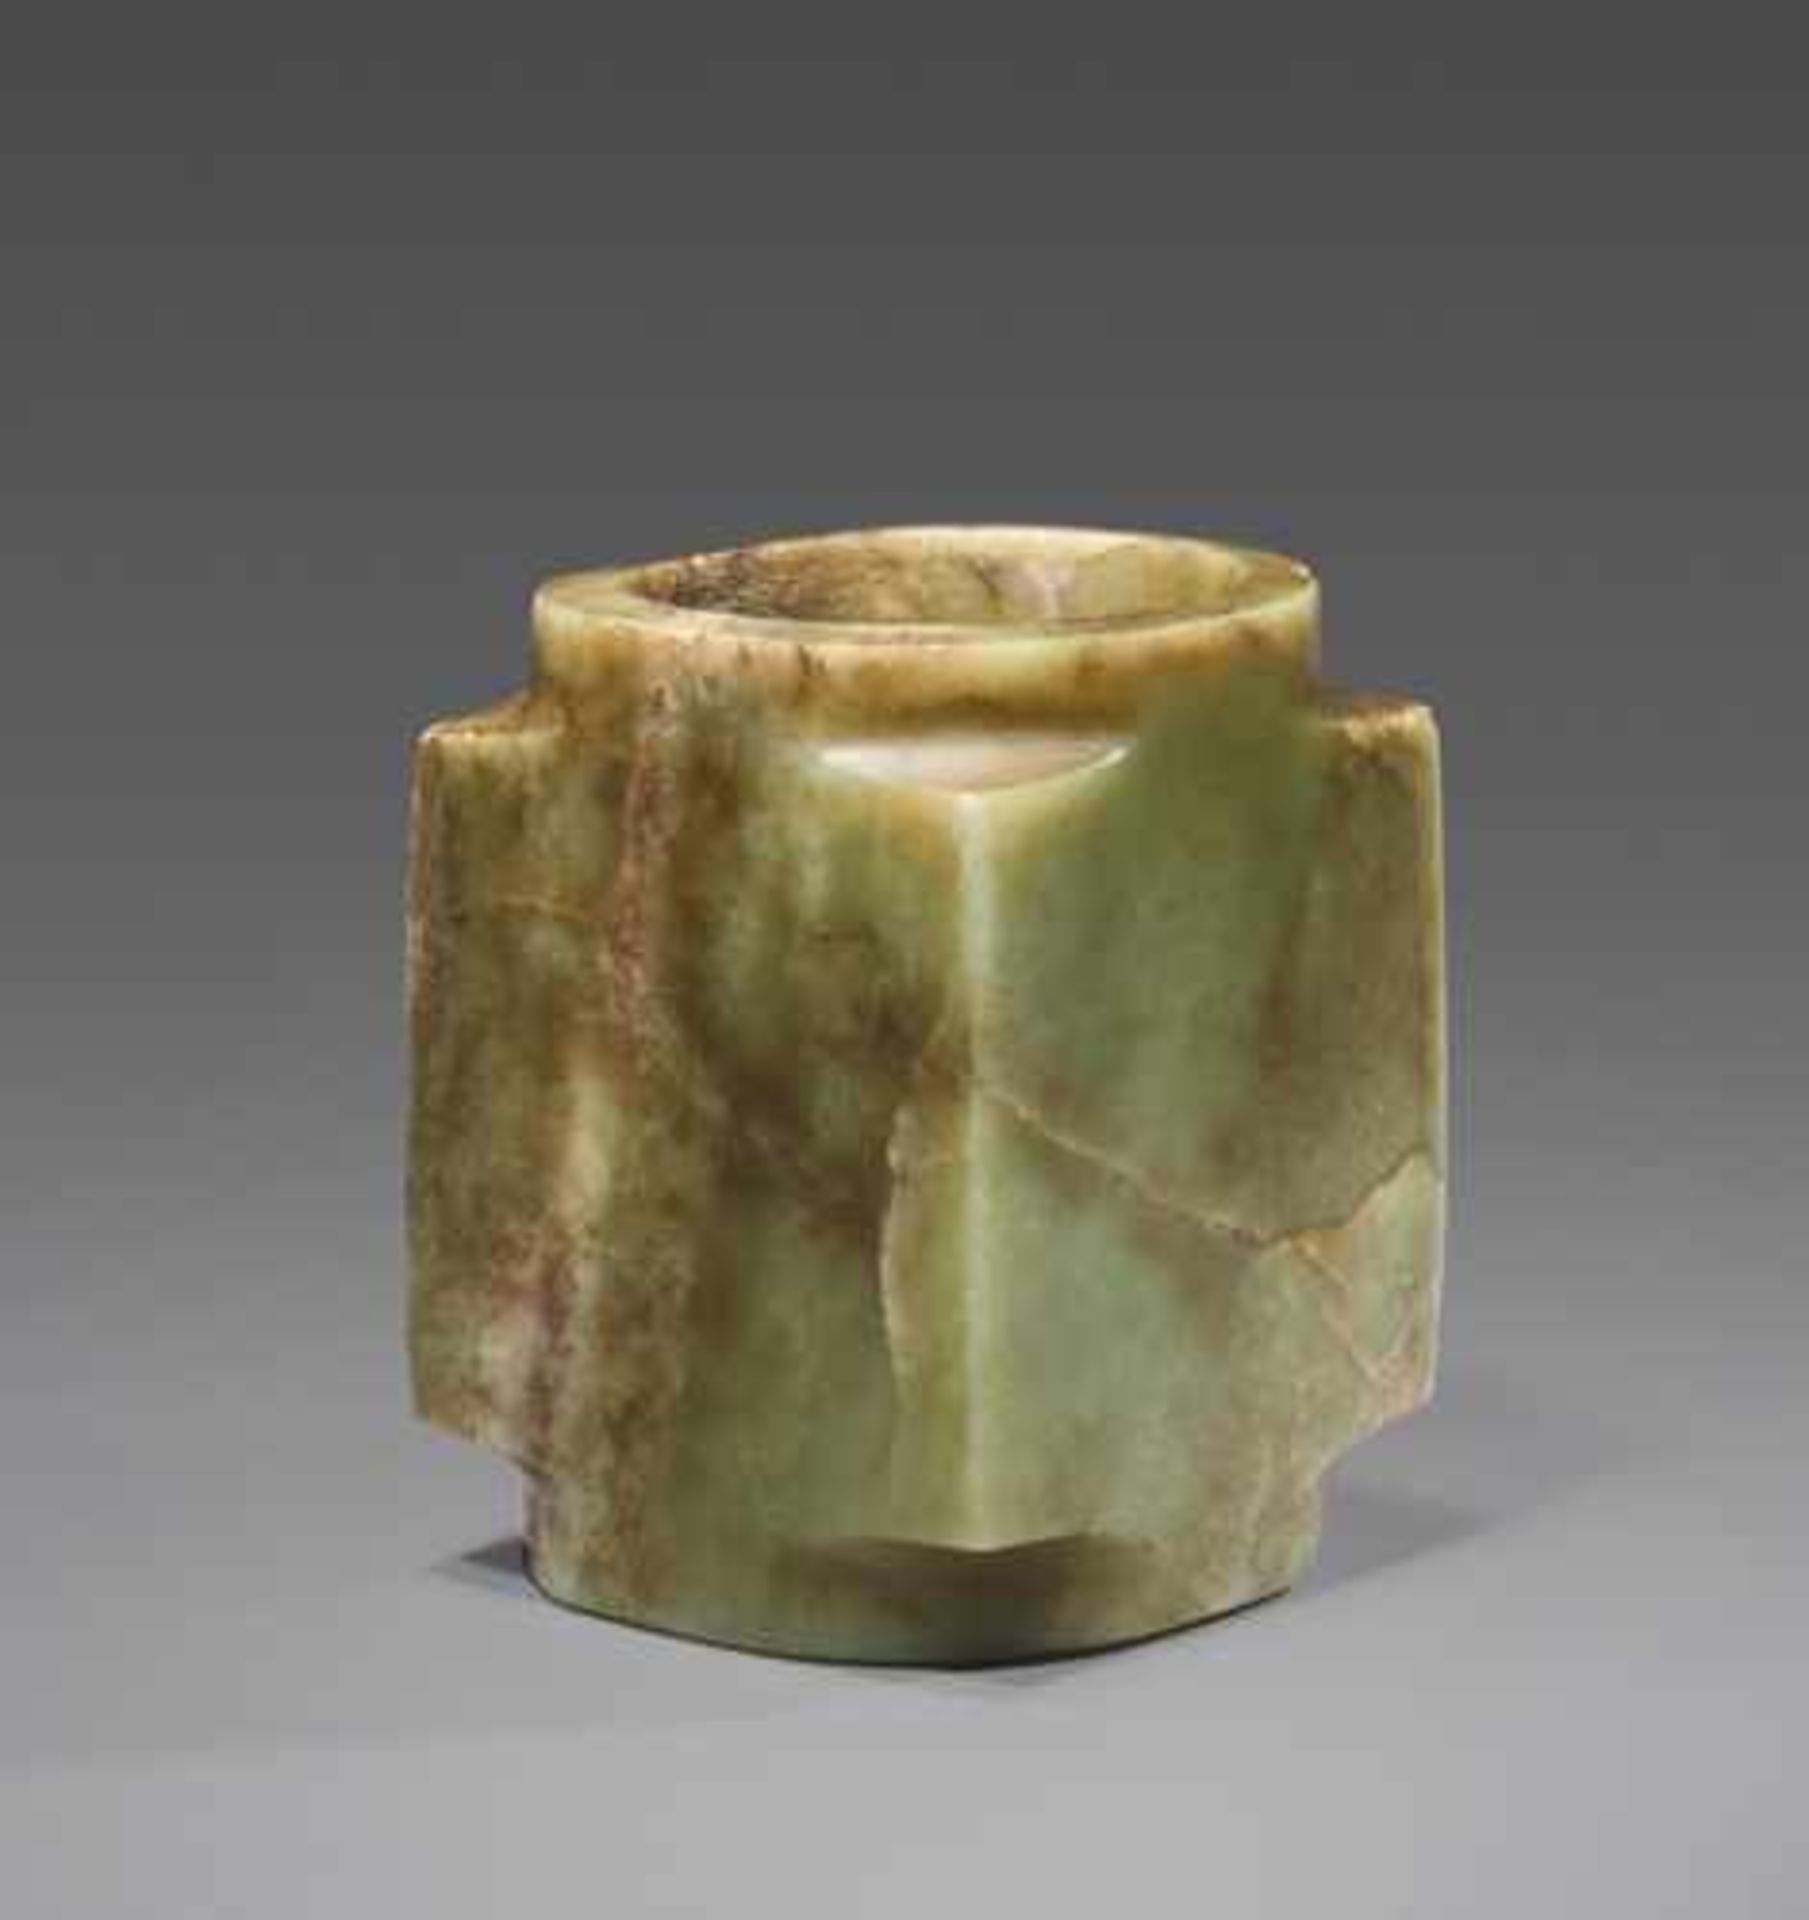 AN ELEGANT, PLAIN CONG IN HIGHLY POLISHED, LIGHT GREEN JADE Jade, China. Early Bronze Age, Qijia